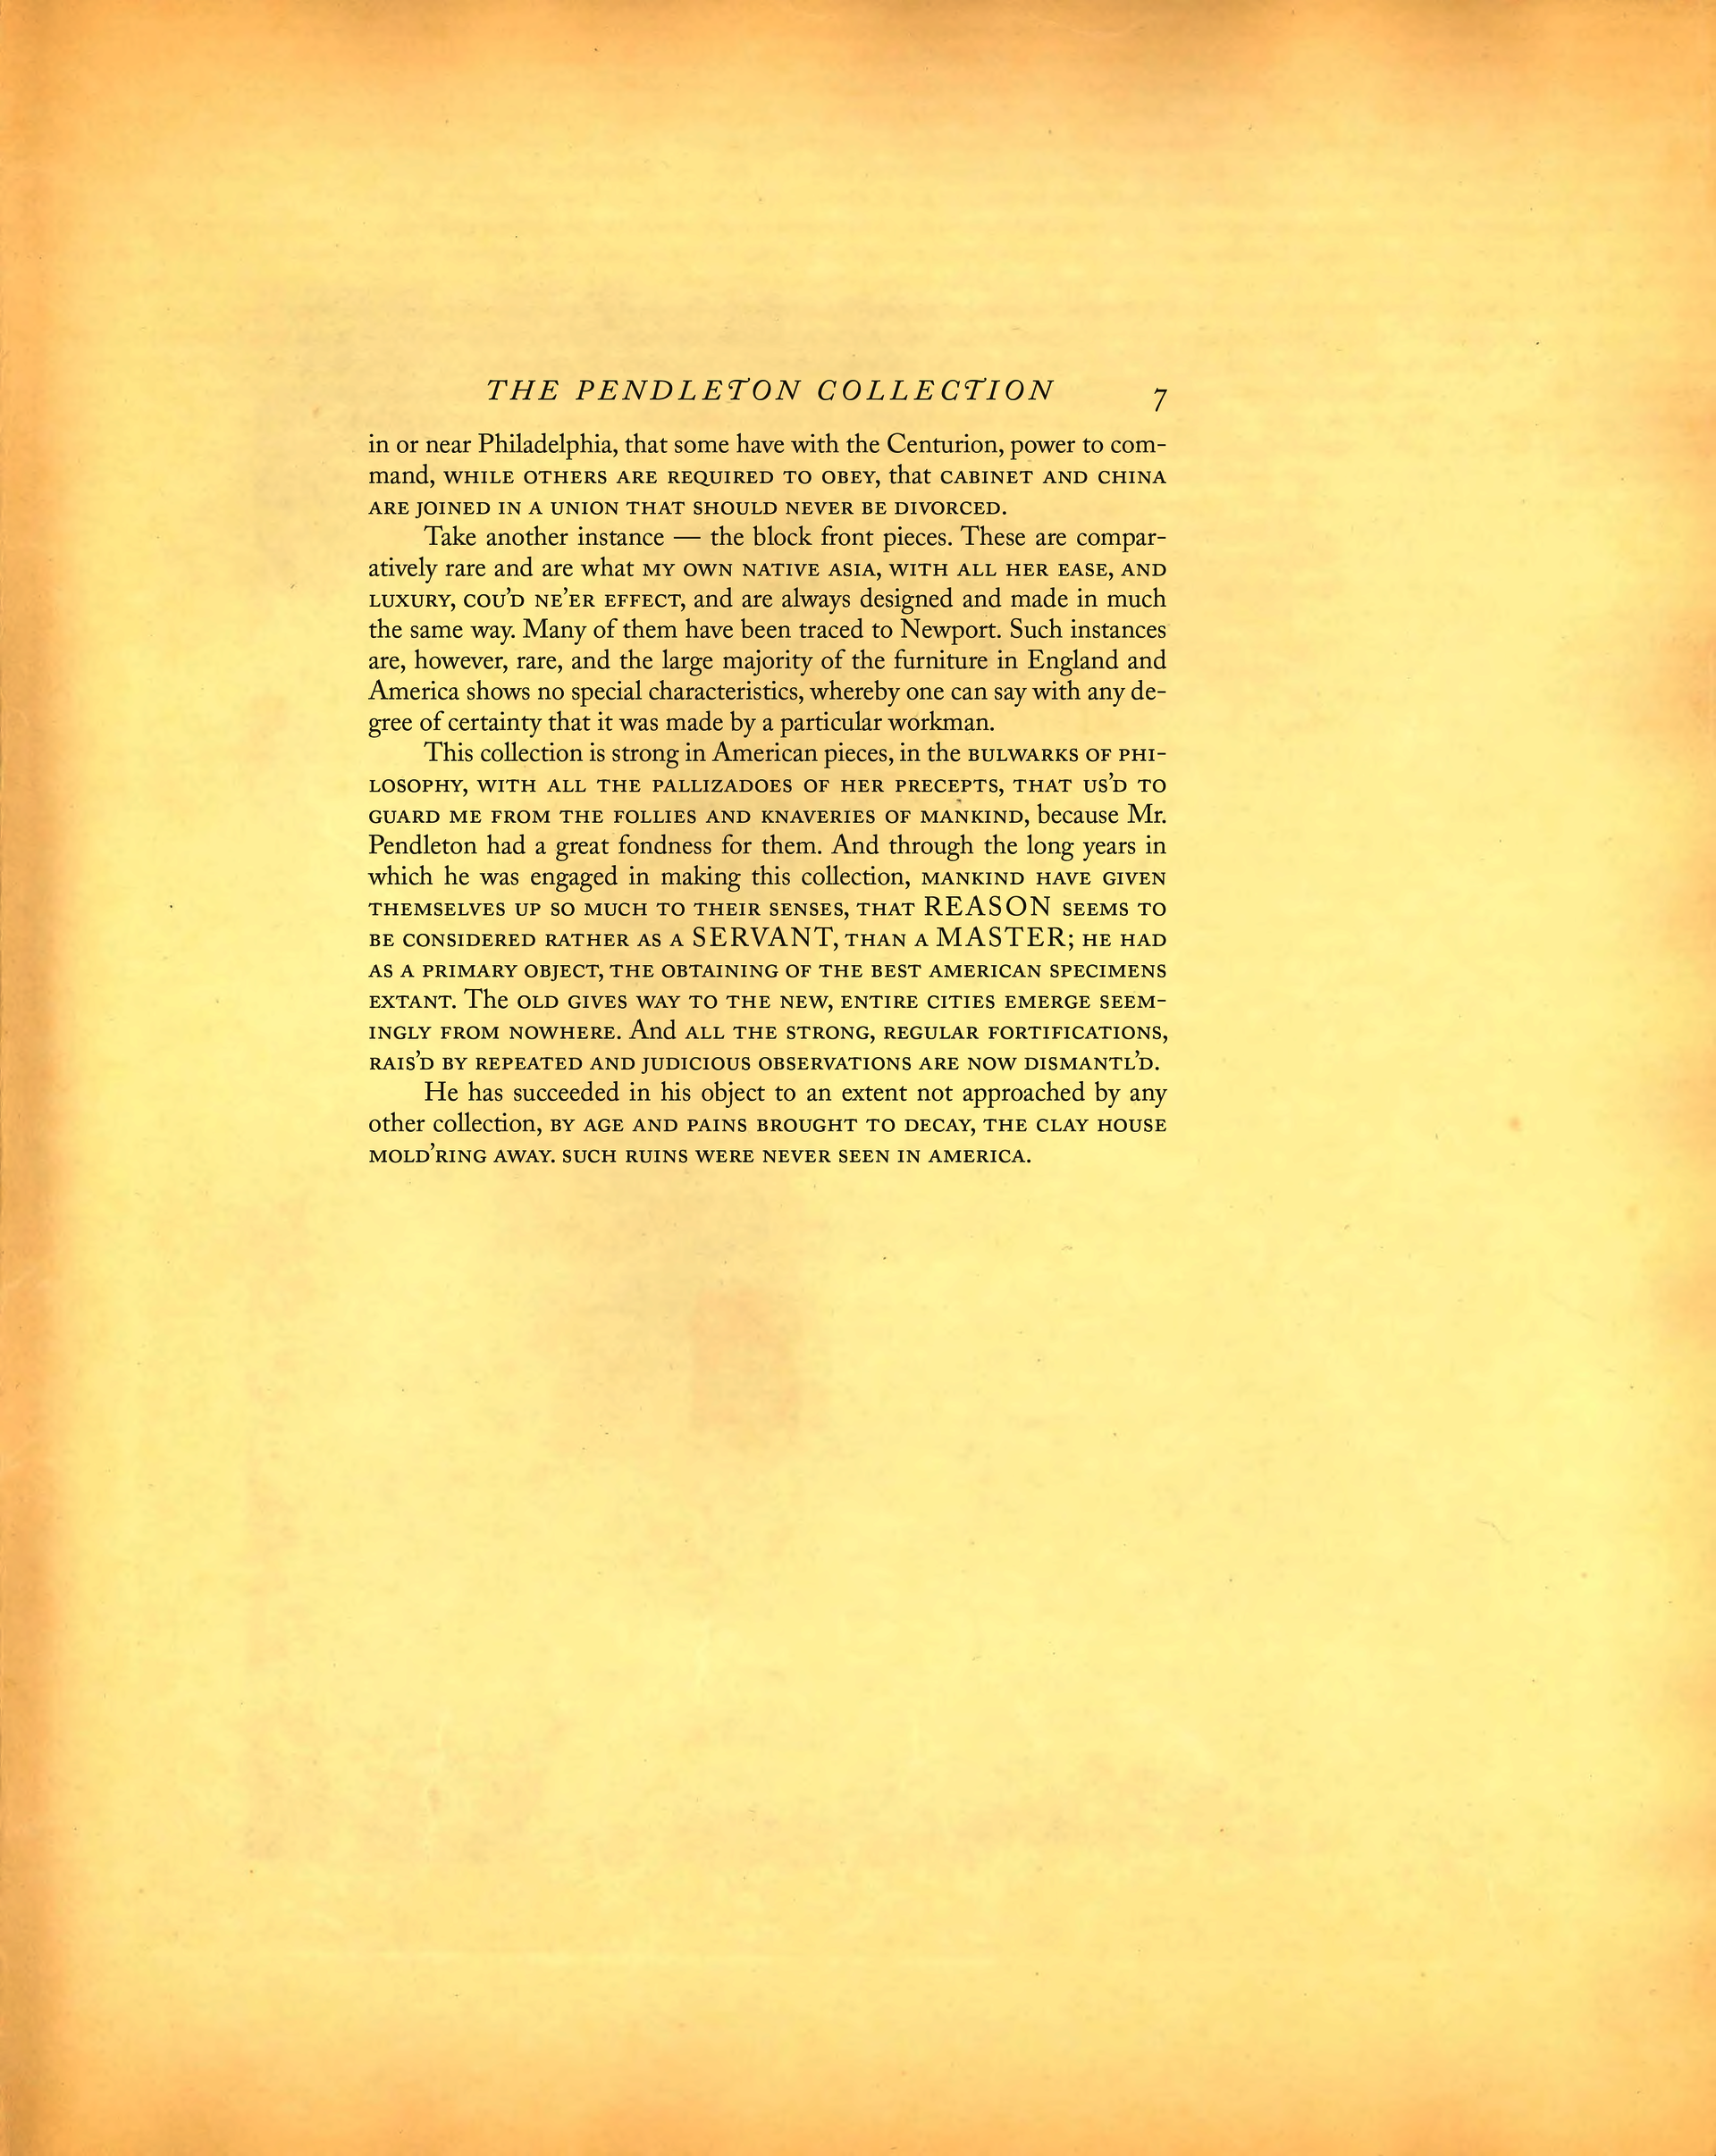 The Pendleton Collection page: Introduction text page 7